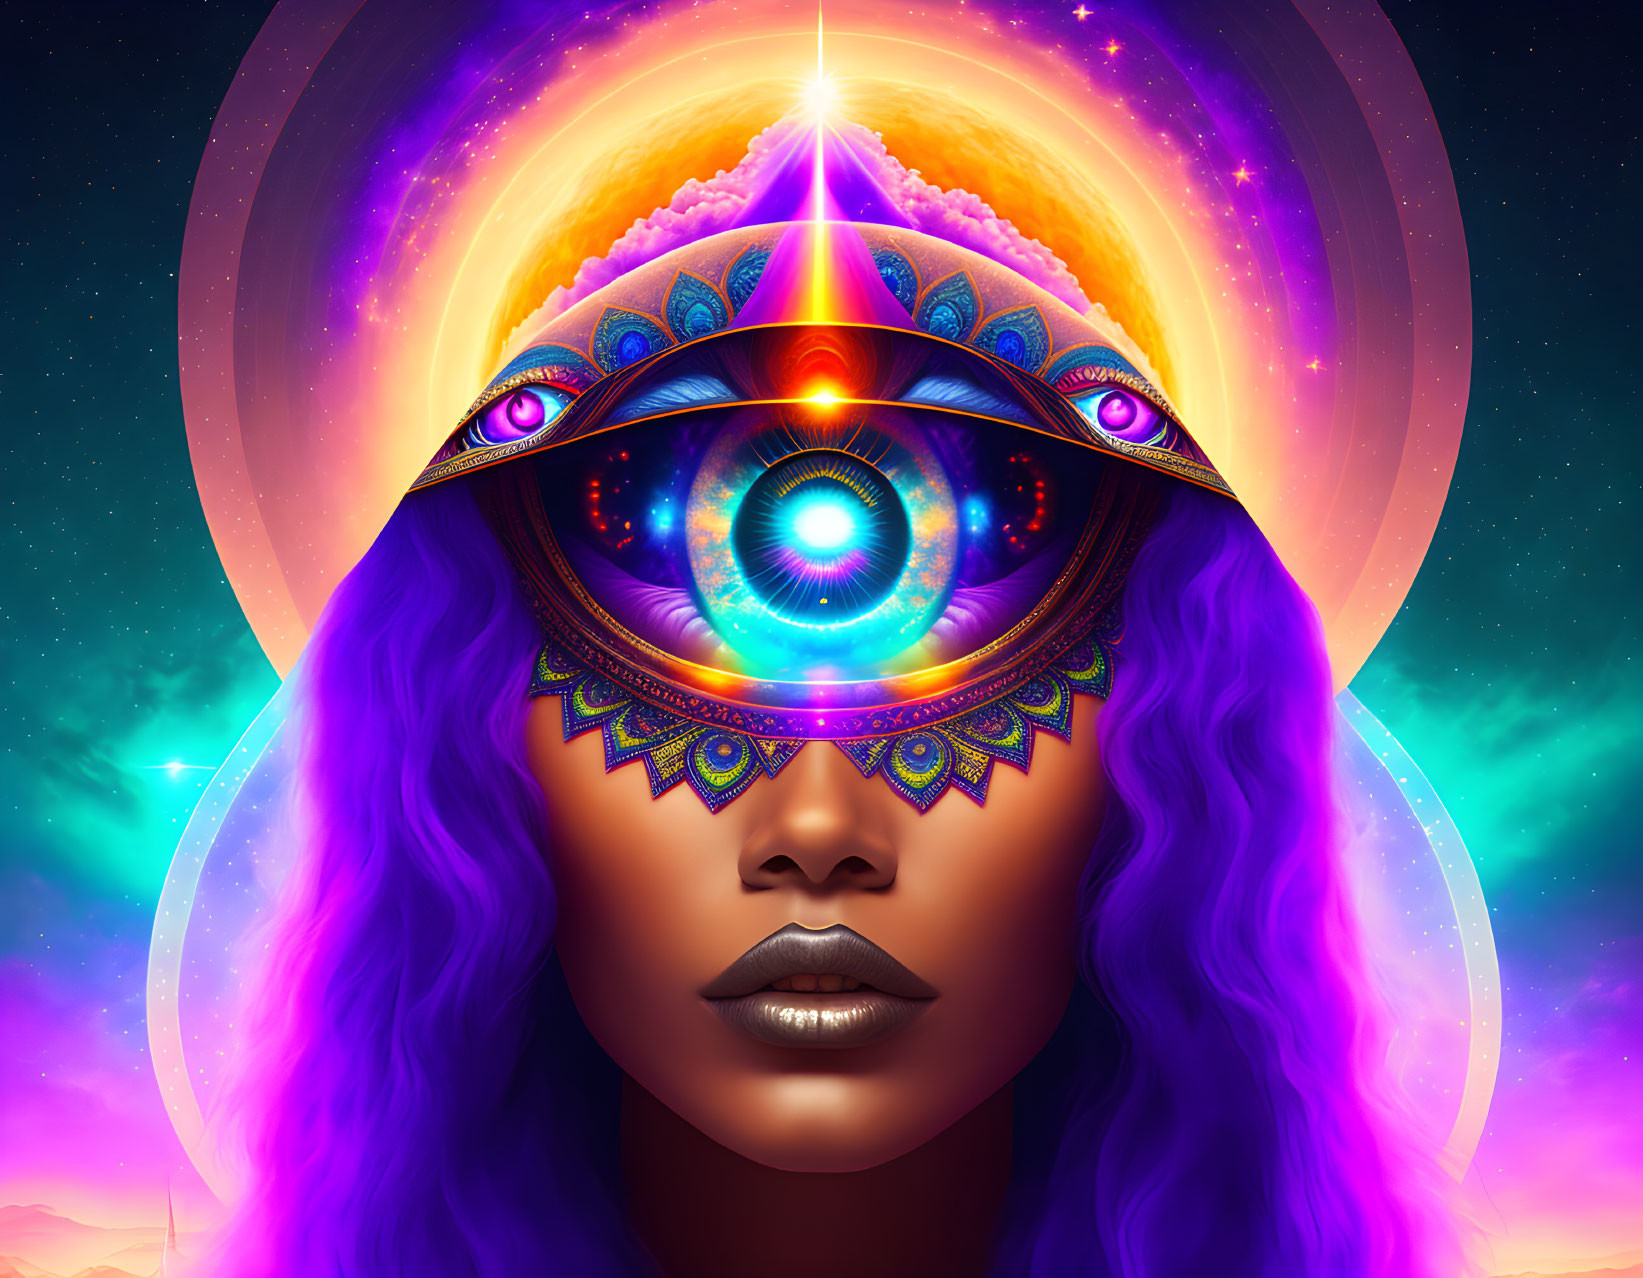 Colorful digital artwork: Woman with purple hair and third eye in cosmic setting